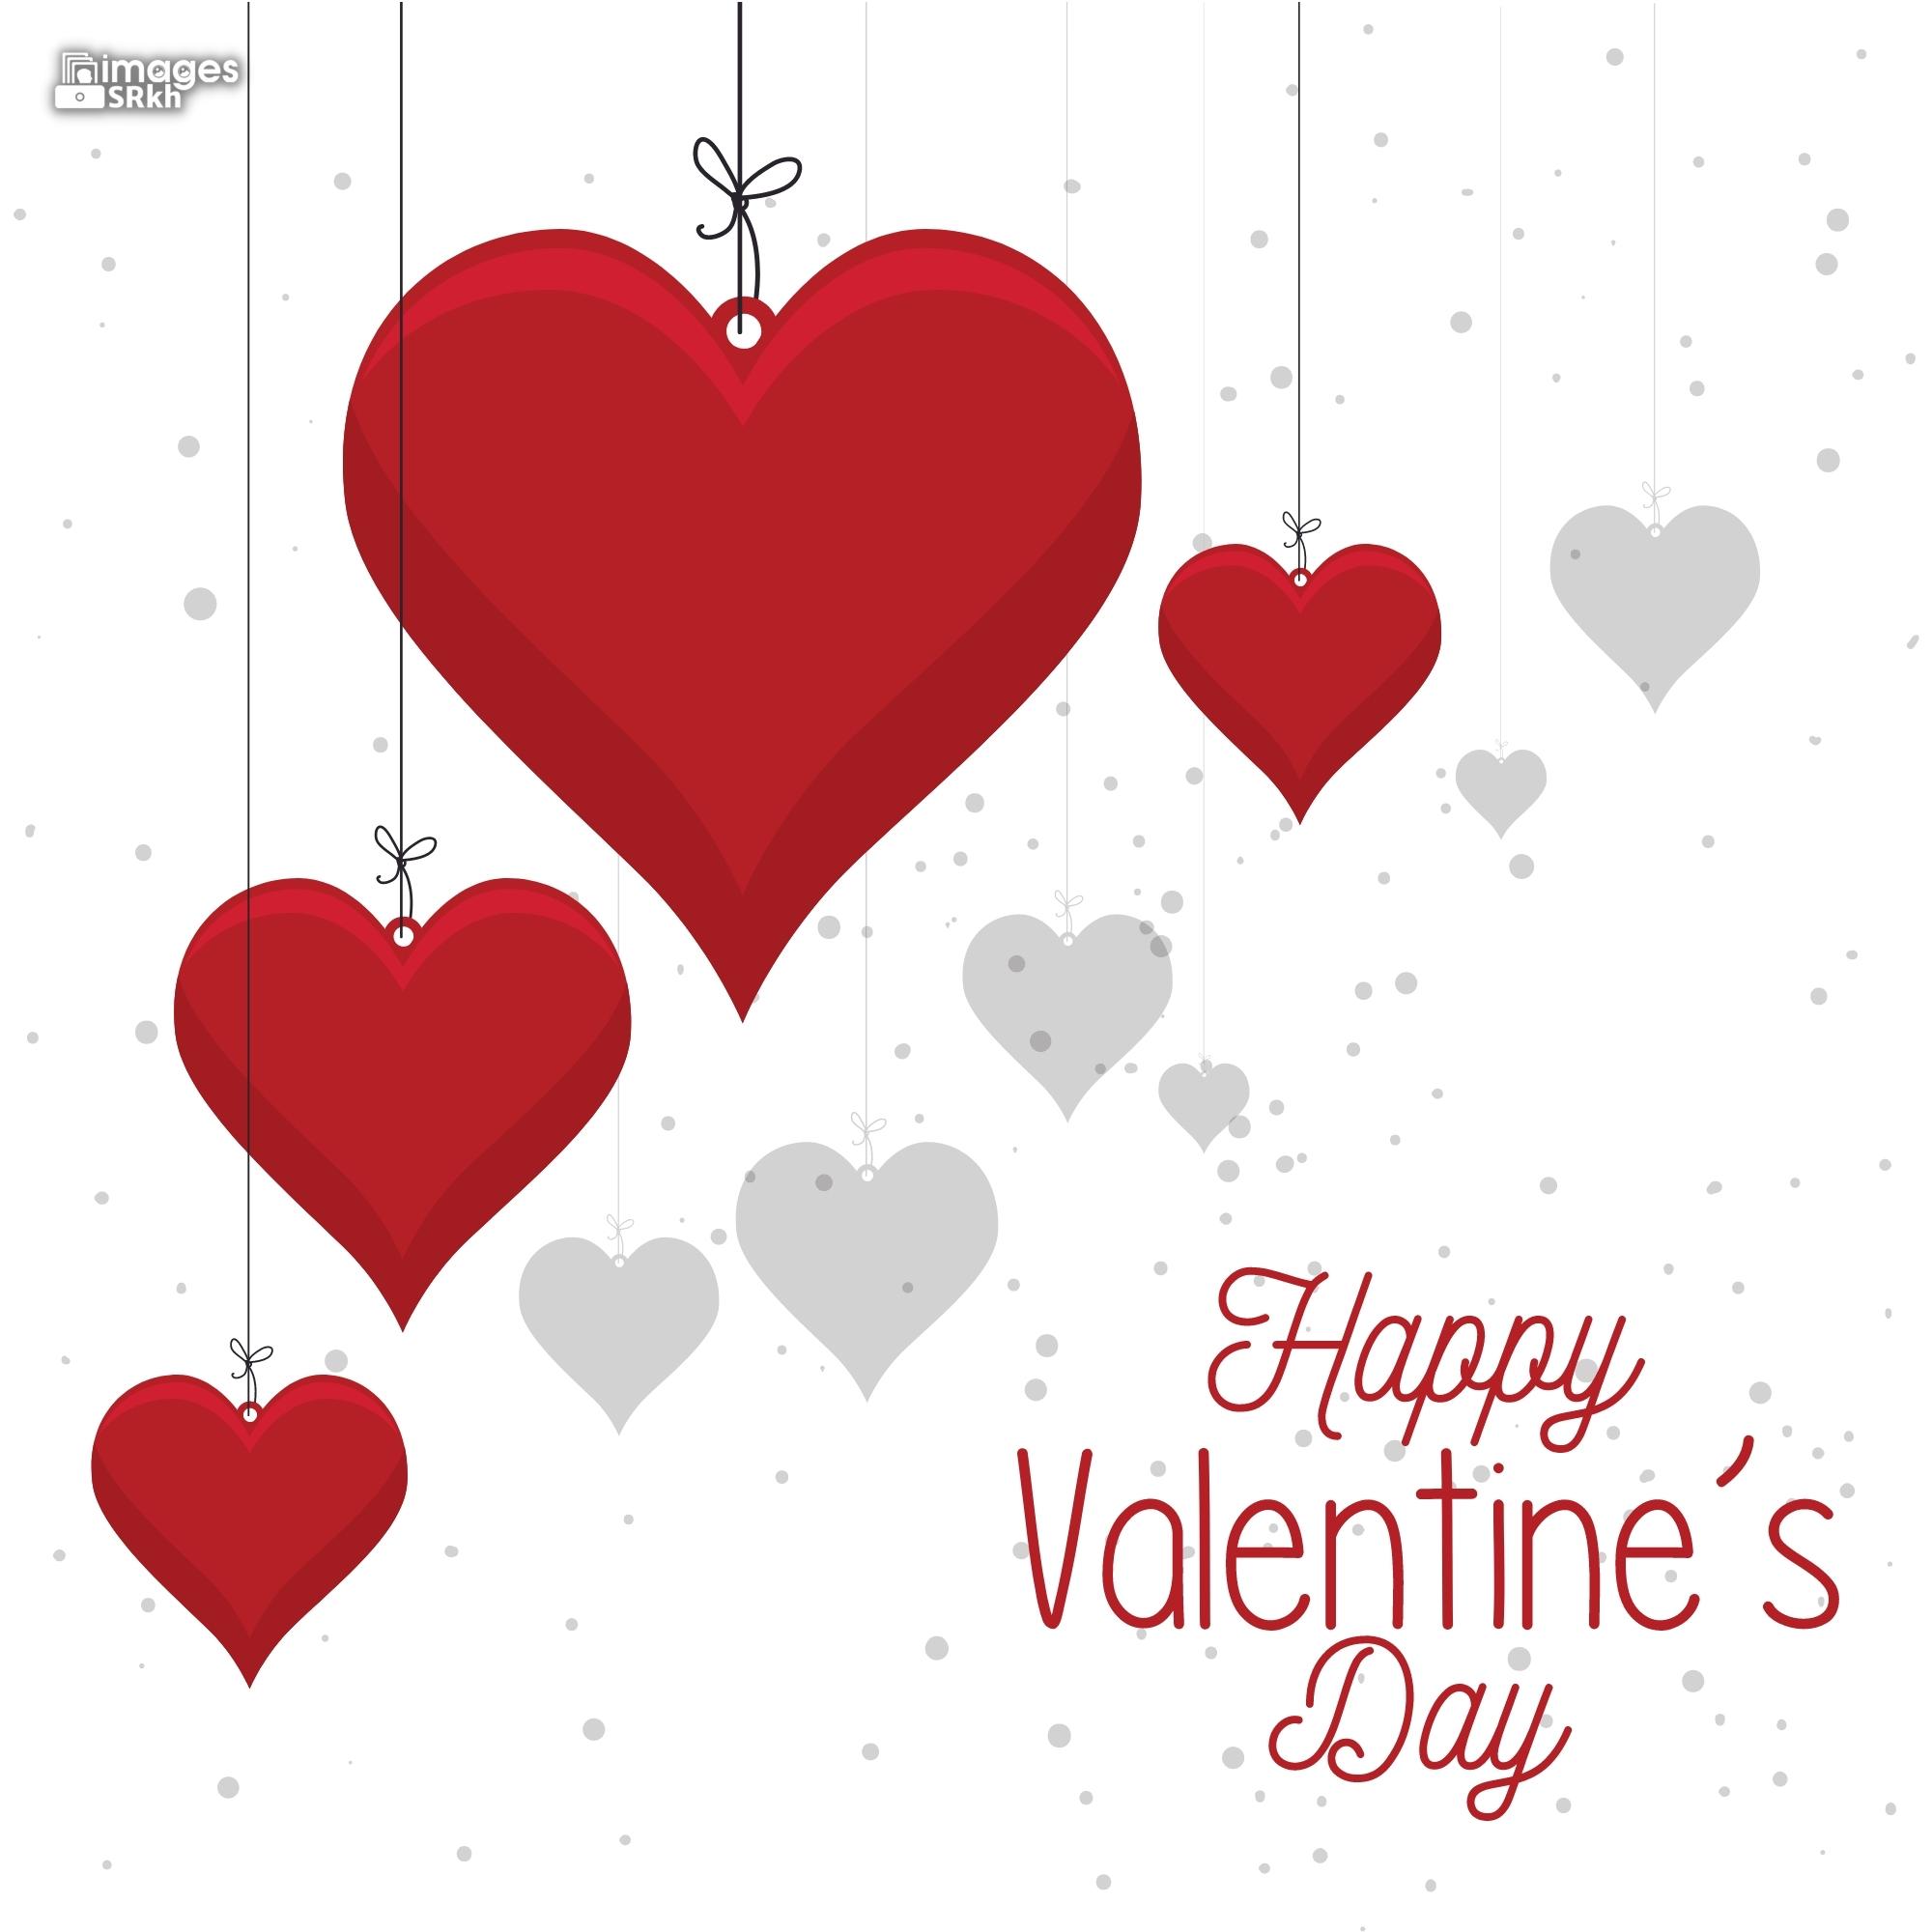 Happy Valentines Day | 547 | PREMIUM IMAGES | Wishes for Love